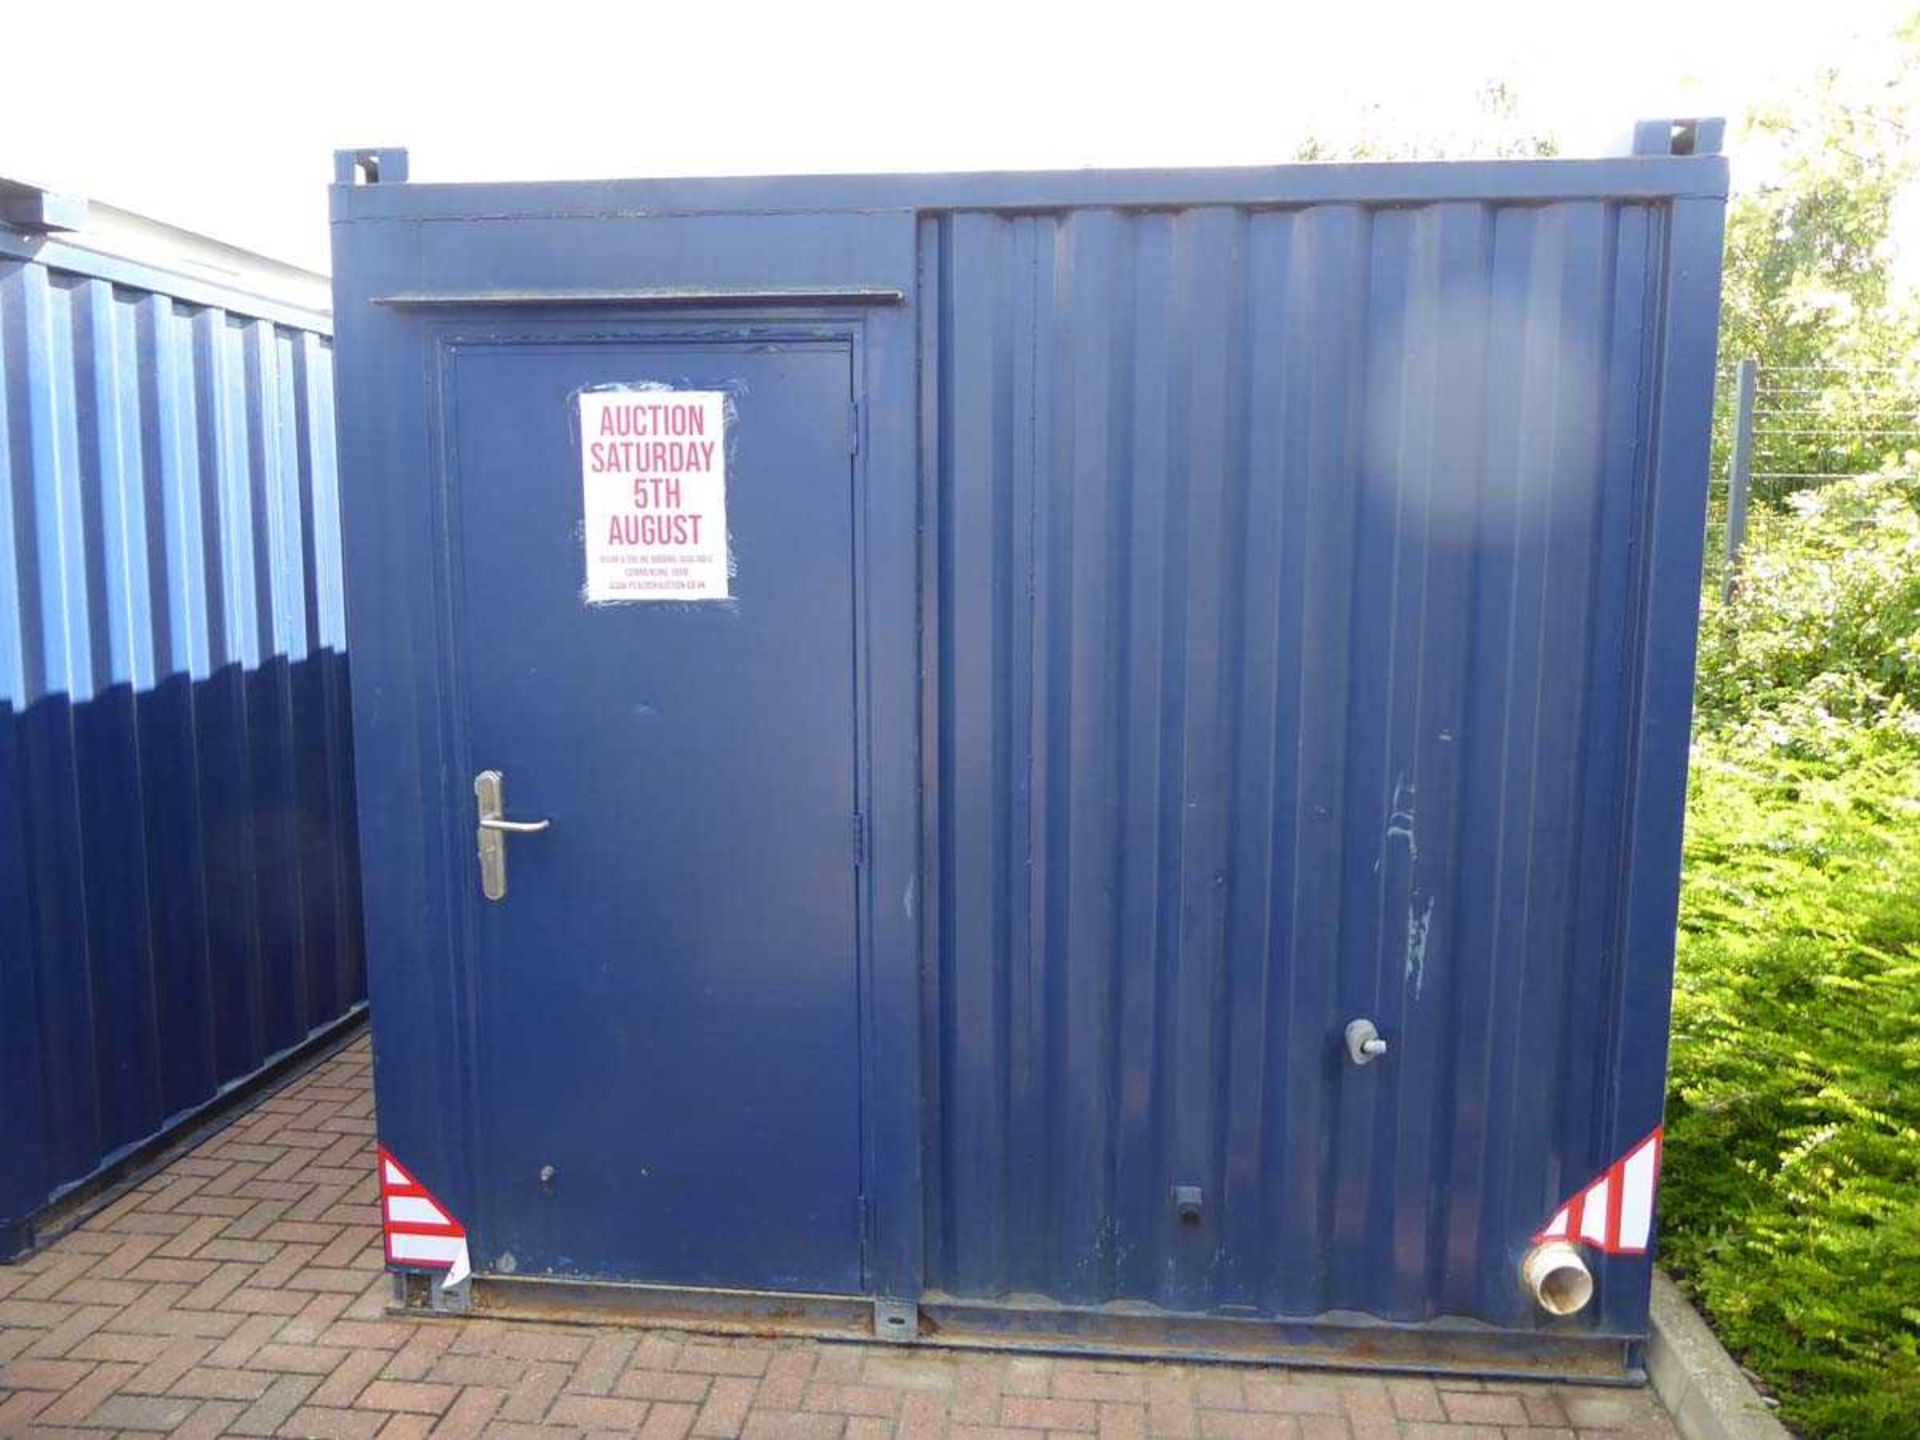 12ft x 9ft toilet block in corrugated steel toilet block in corrugated steel with men's 2 cubicle/ - Image 3 of 5